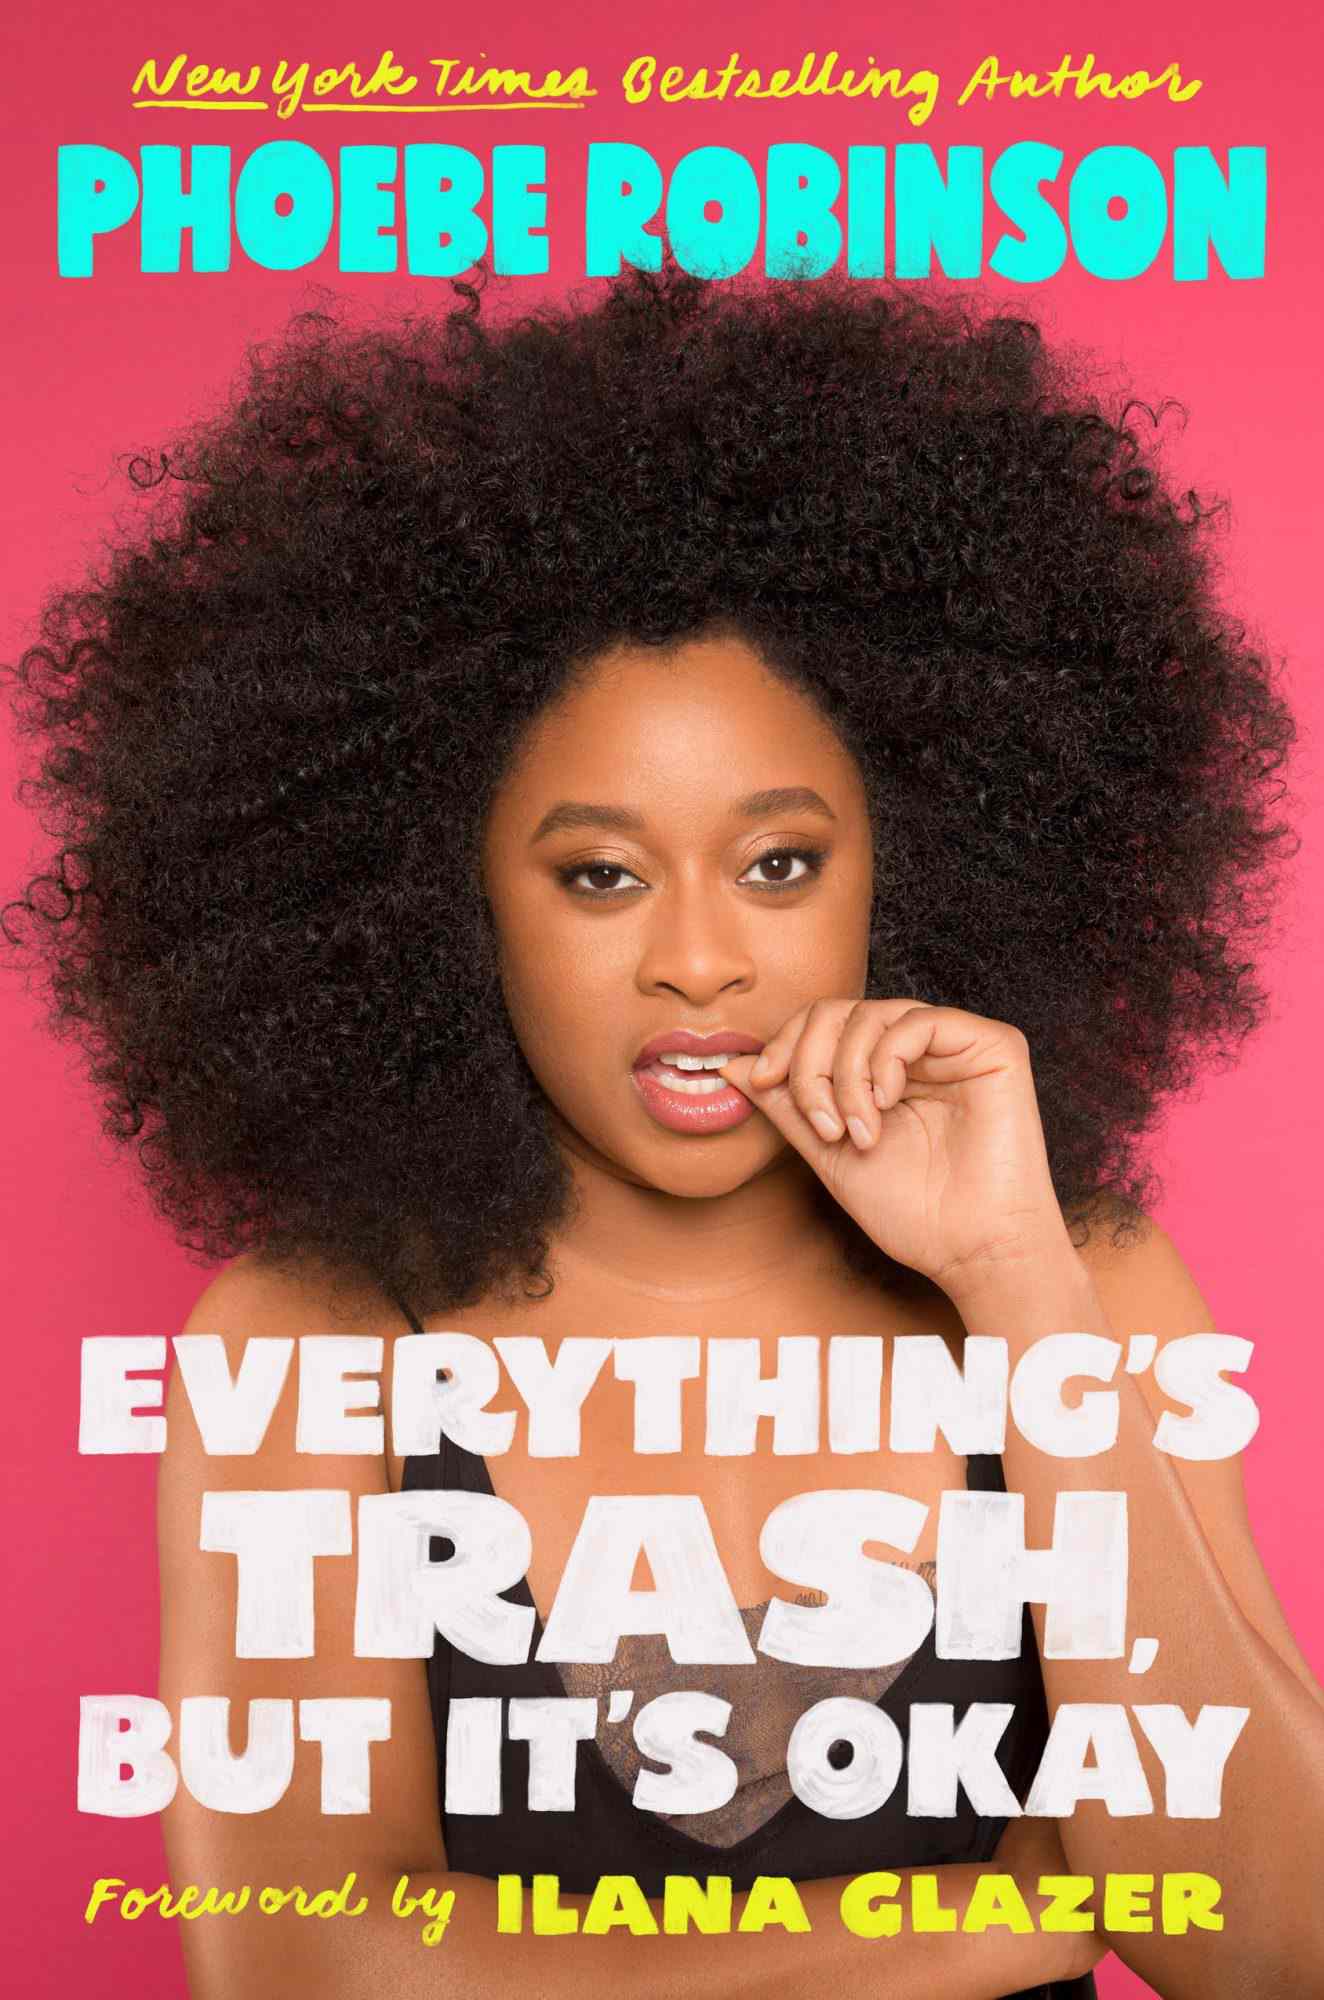 Phoebe Robinson, Everything's Trash, but It's Okay  CR: Penguin